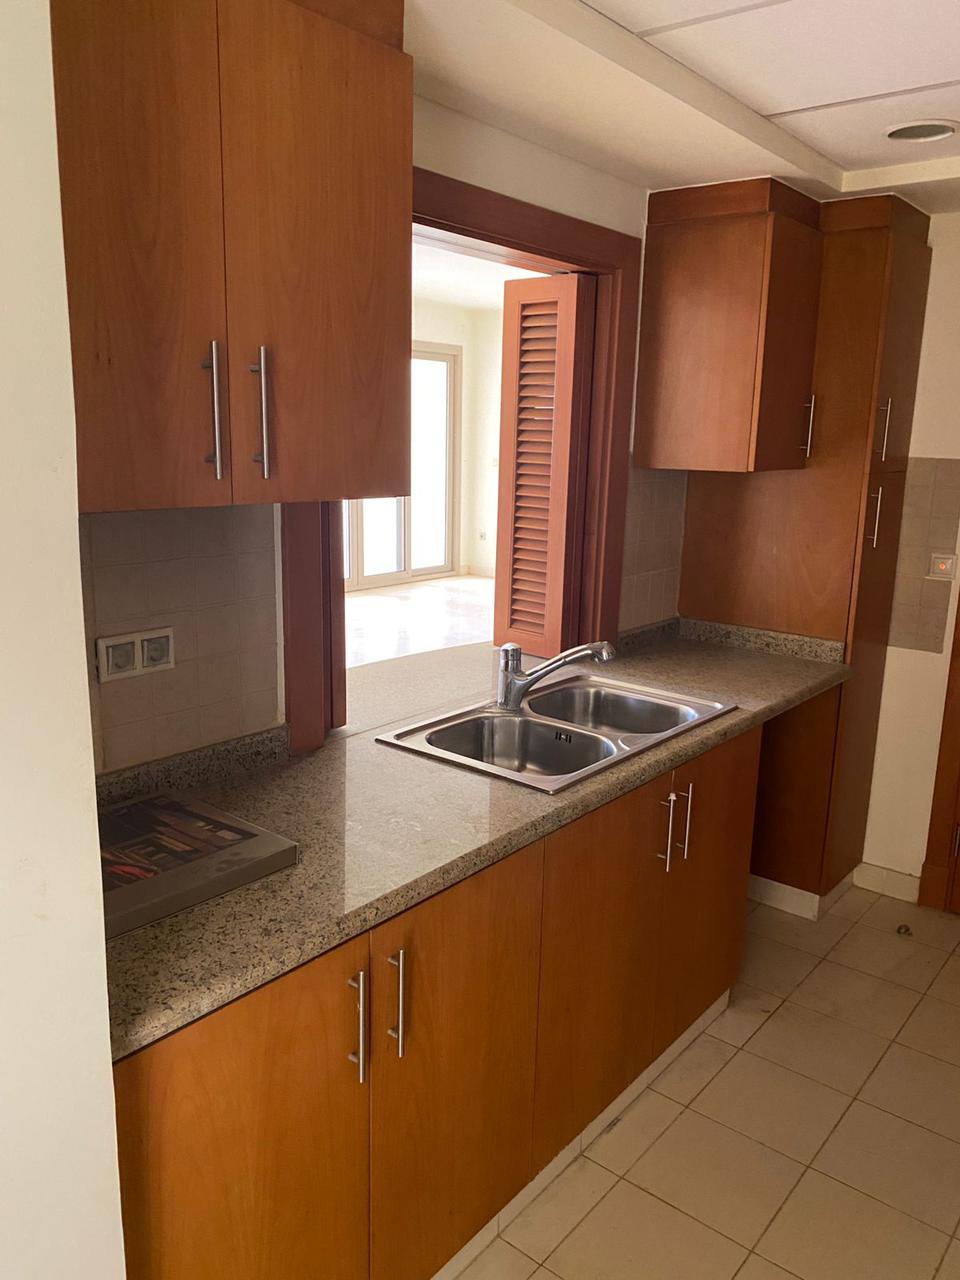 Rental In Uptown Cairo, Apartment For Rent